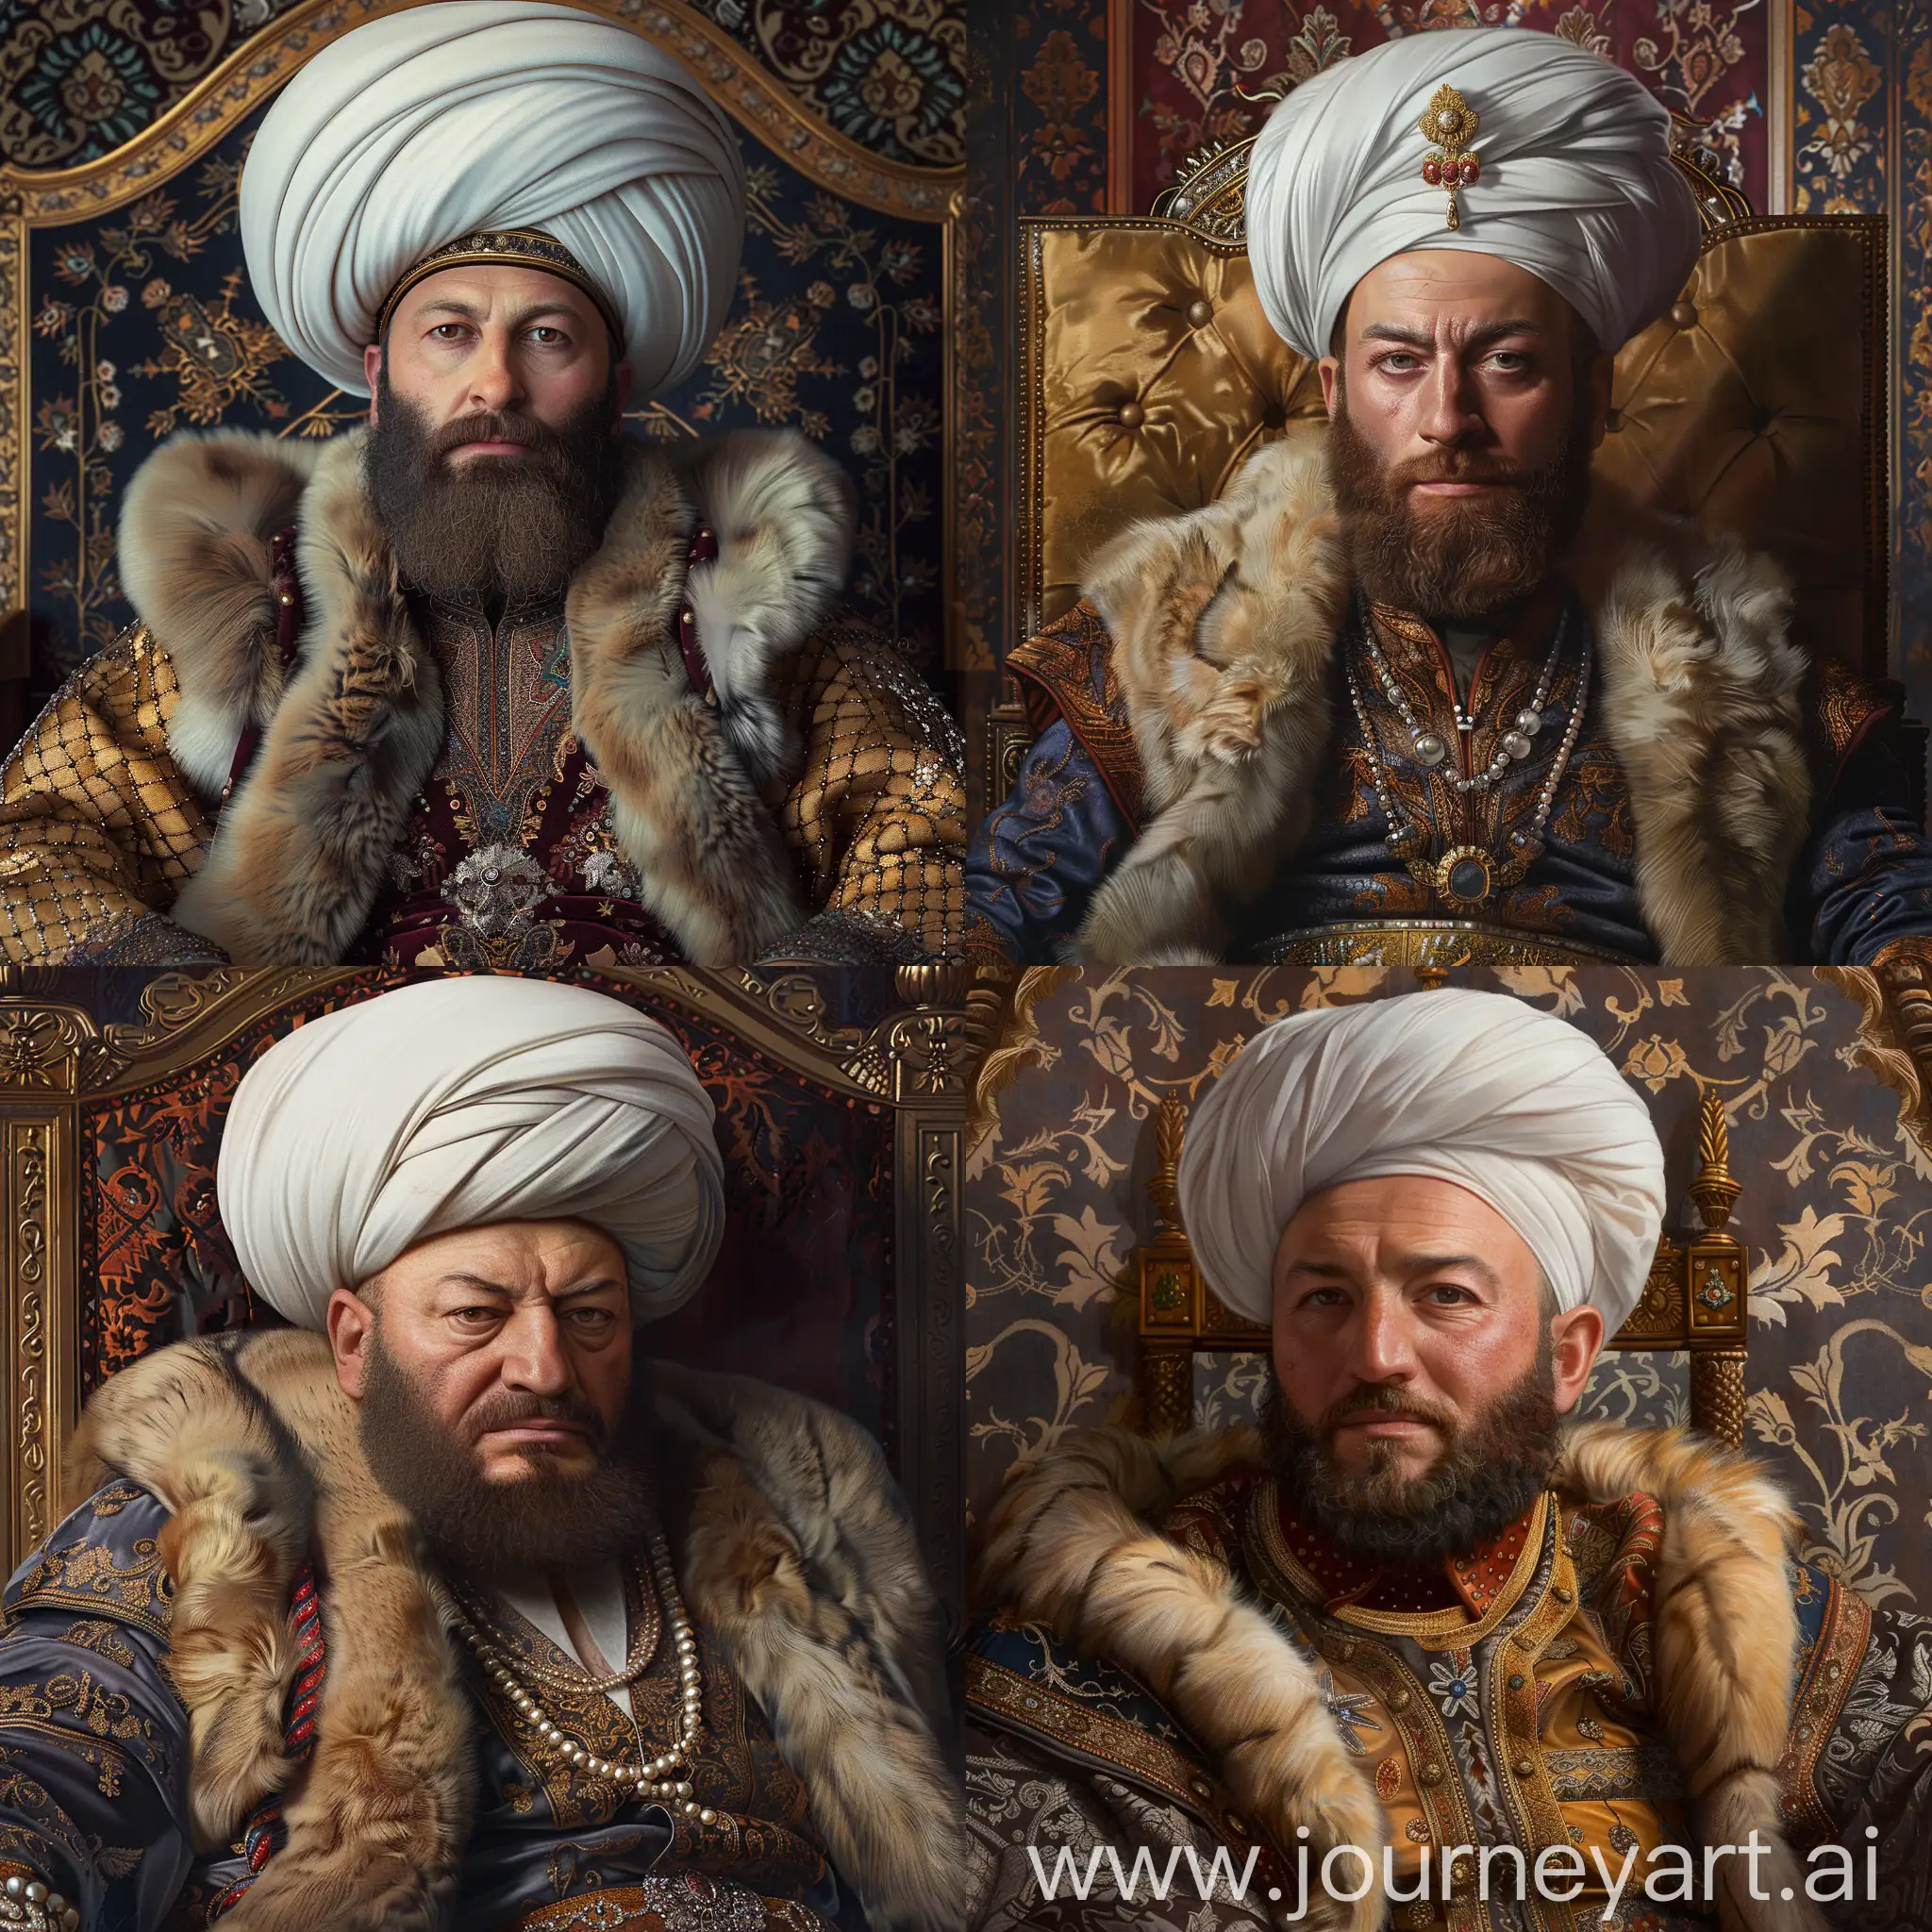 Ottoman-Sultan-Murad-II-Enthroned-in-Istanbul-Palace-Regal-Portrait-in-Luxurious-Caftan-and-Turban